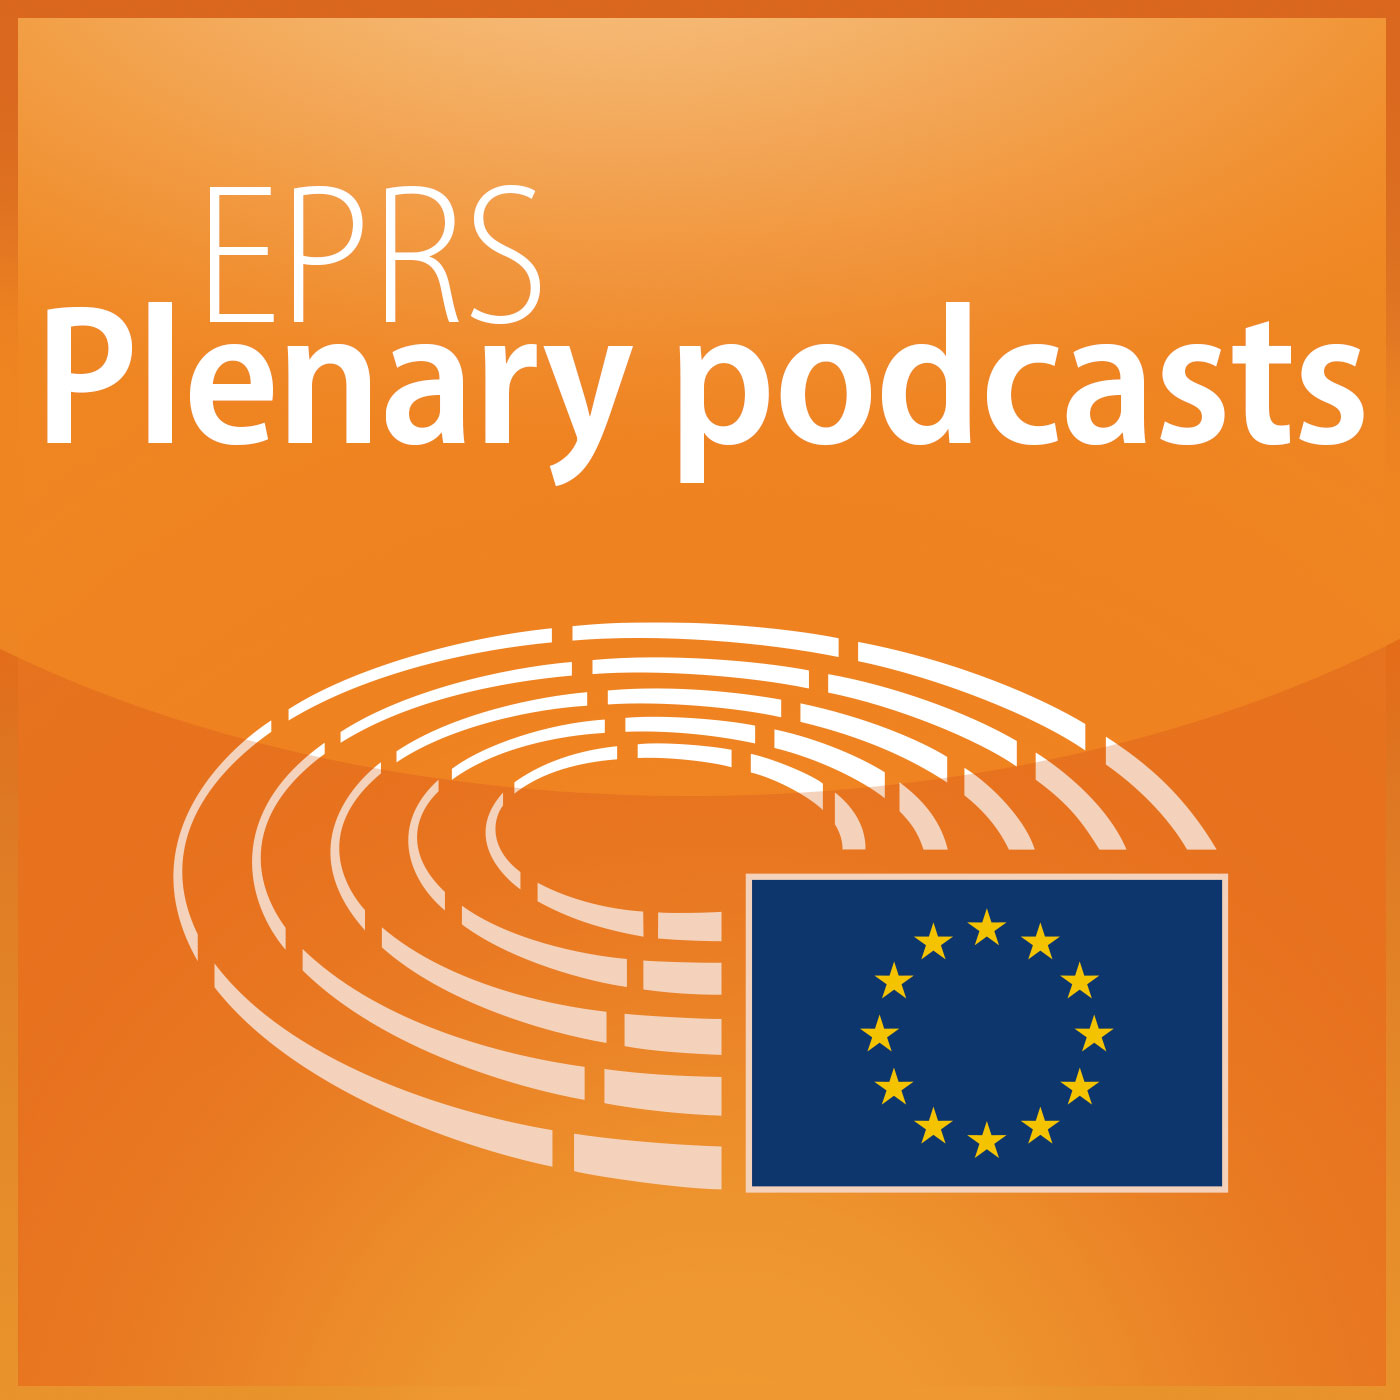 Tune in to the new EPRS plenary podcasts